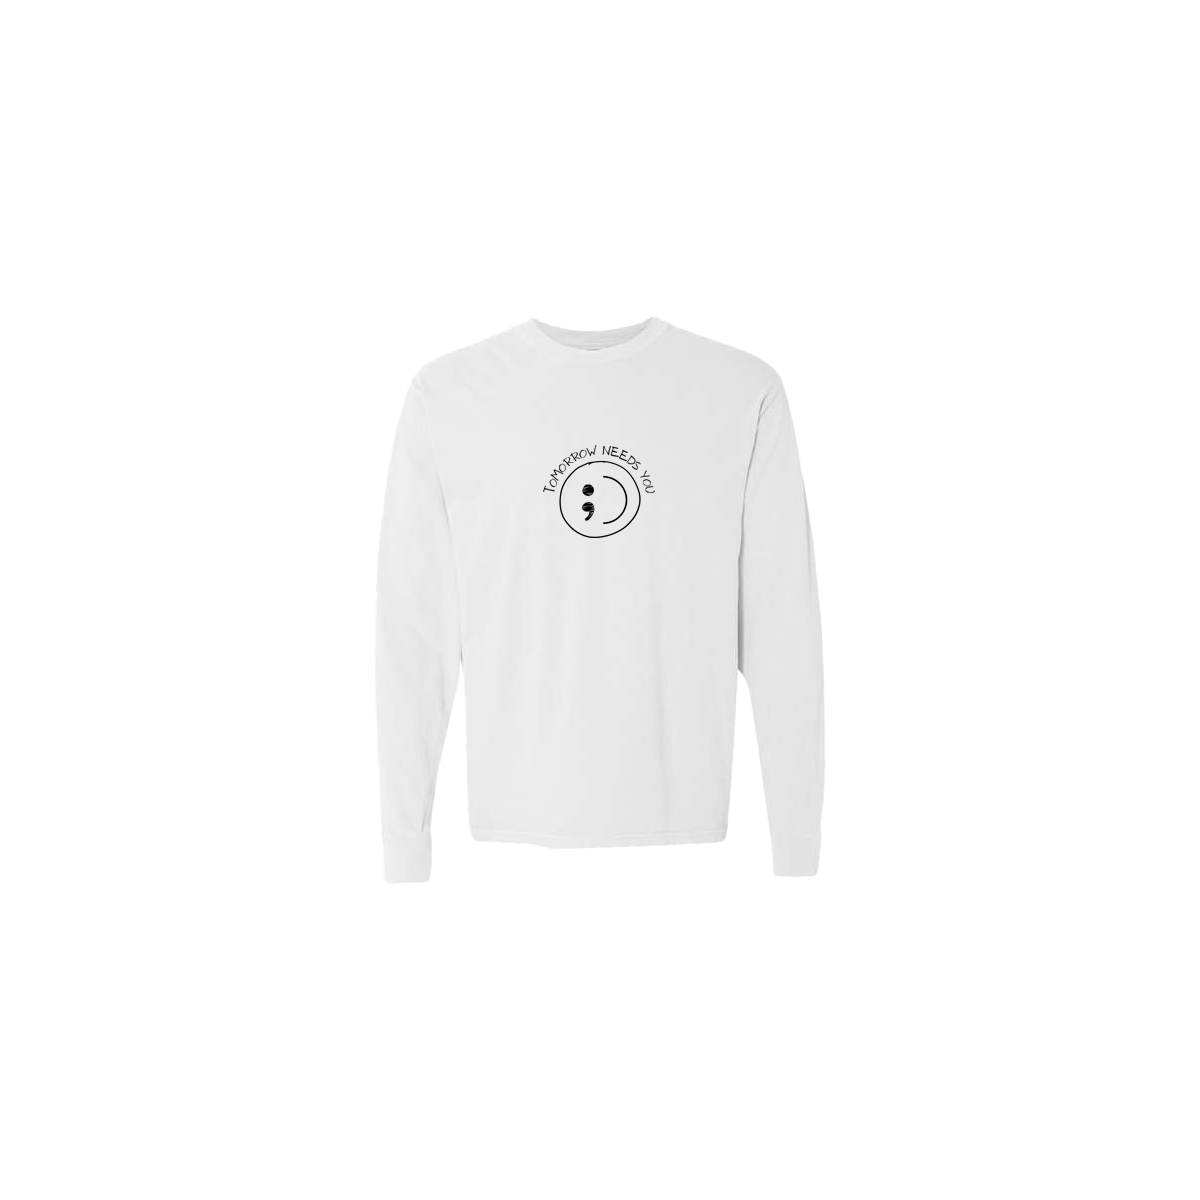 Tomorrow Needs You Embroidered White Long Sleeve Tshirt - Mental Health Awareness Clothing